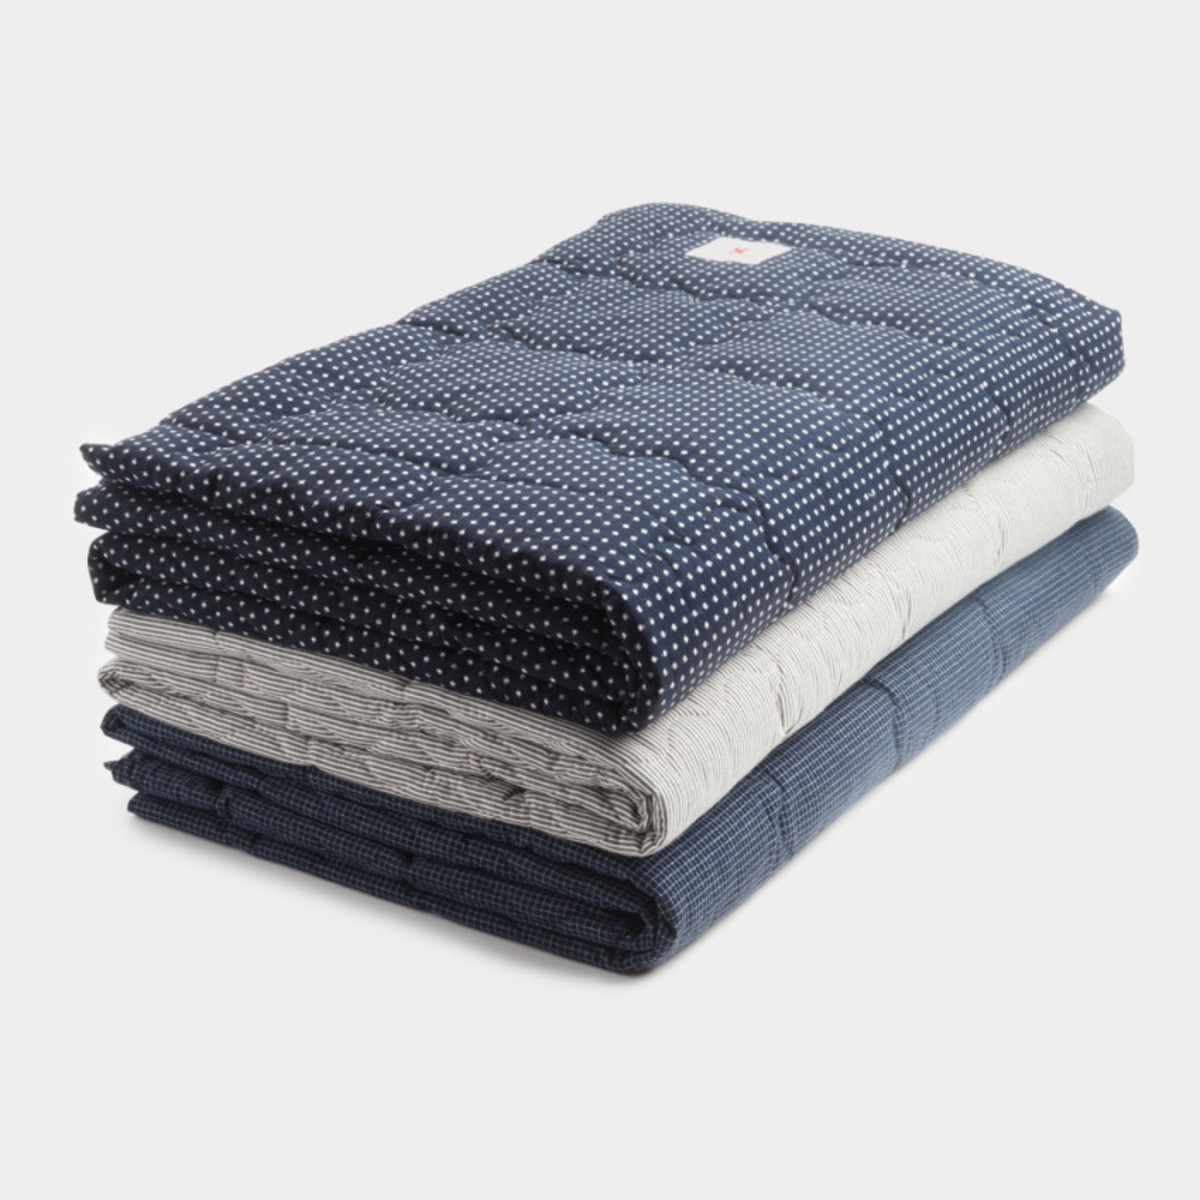 Best Made Japanese Quilted Blankets